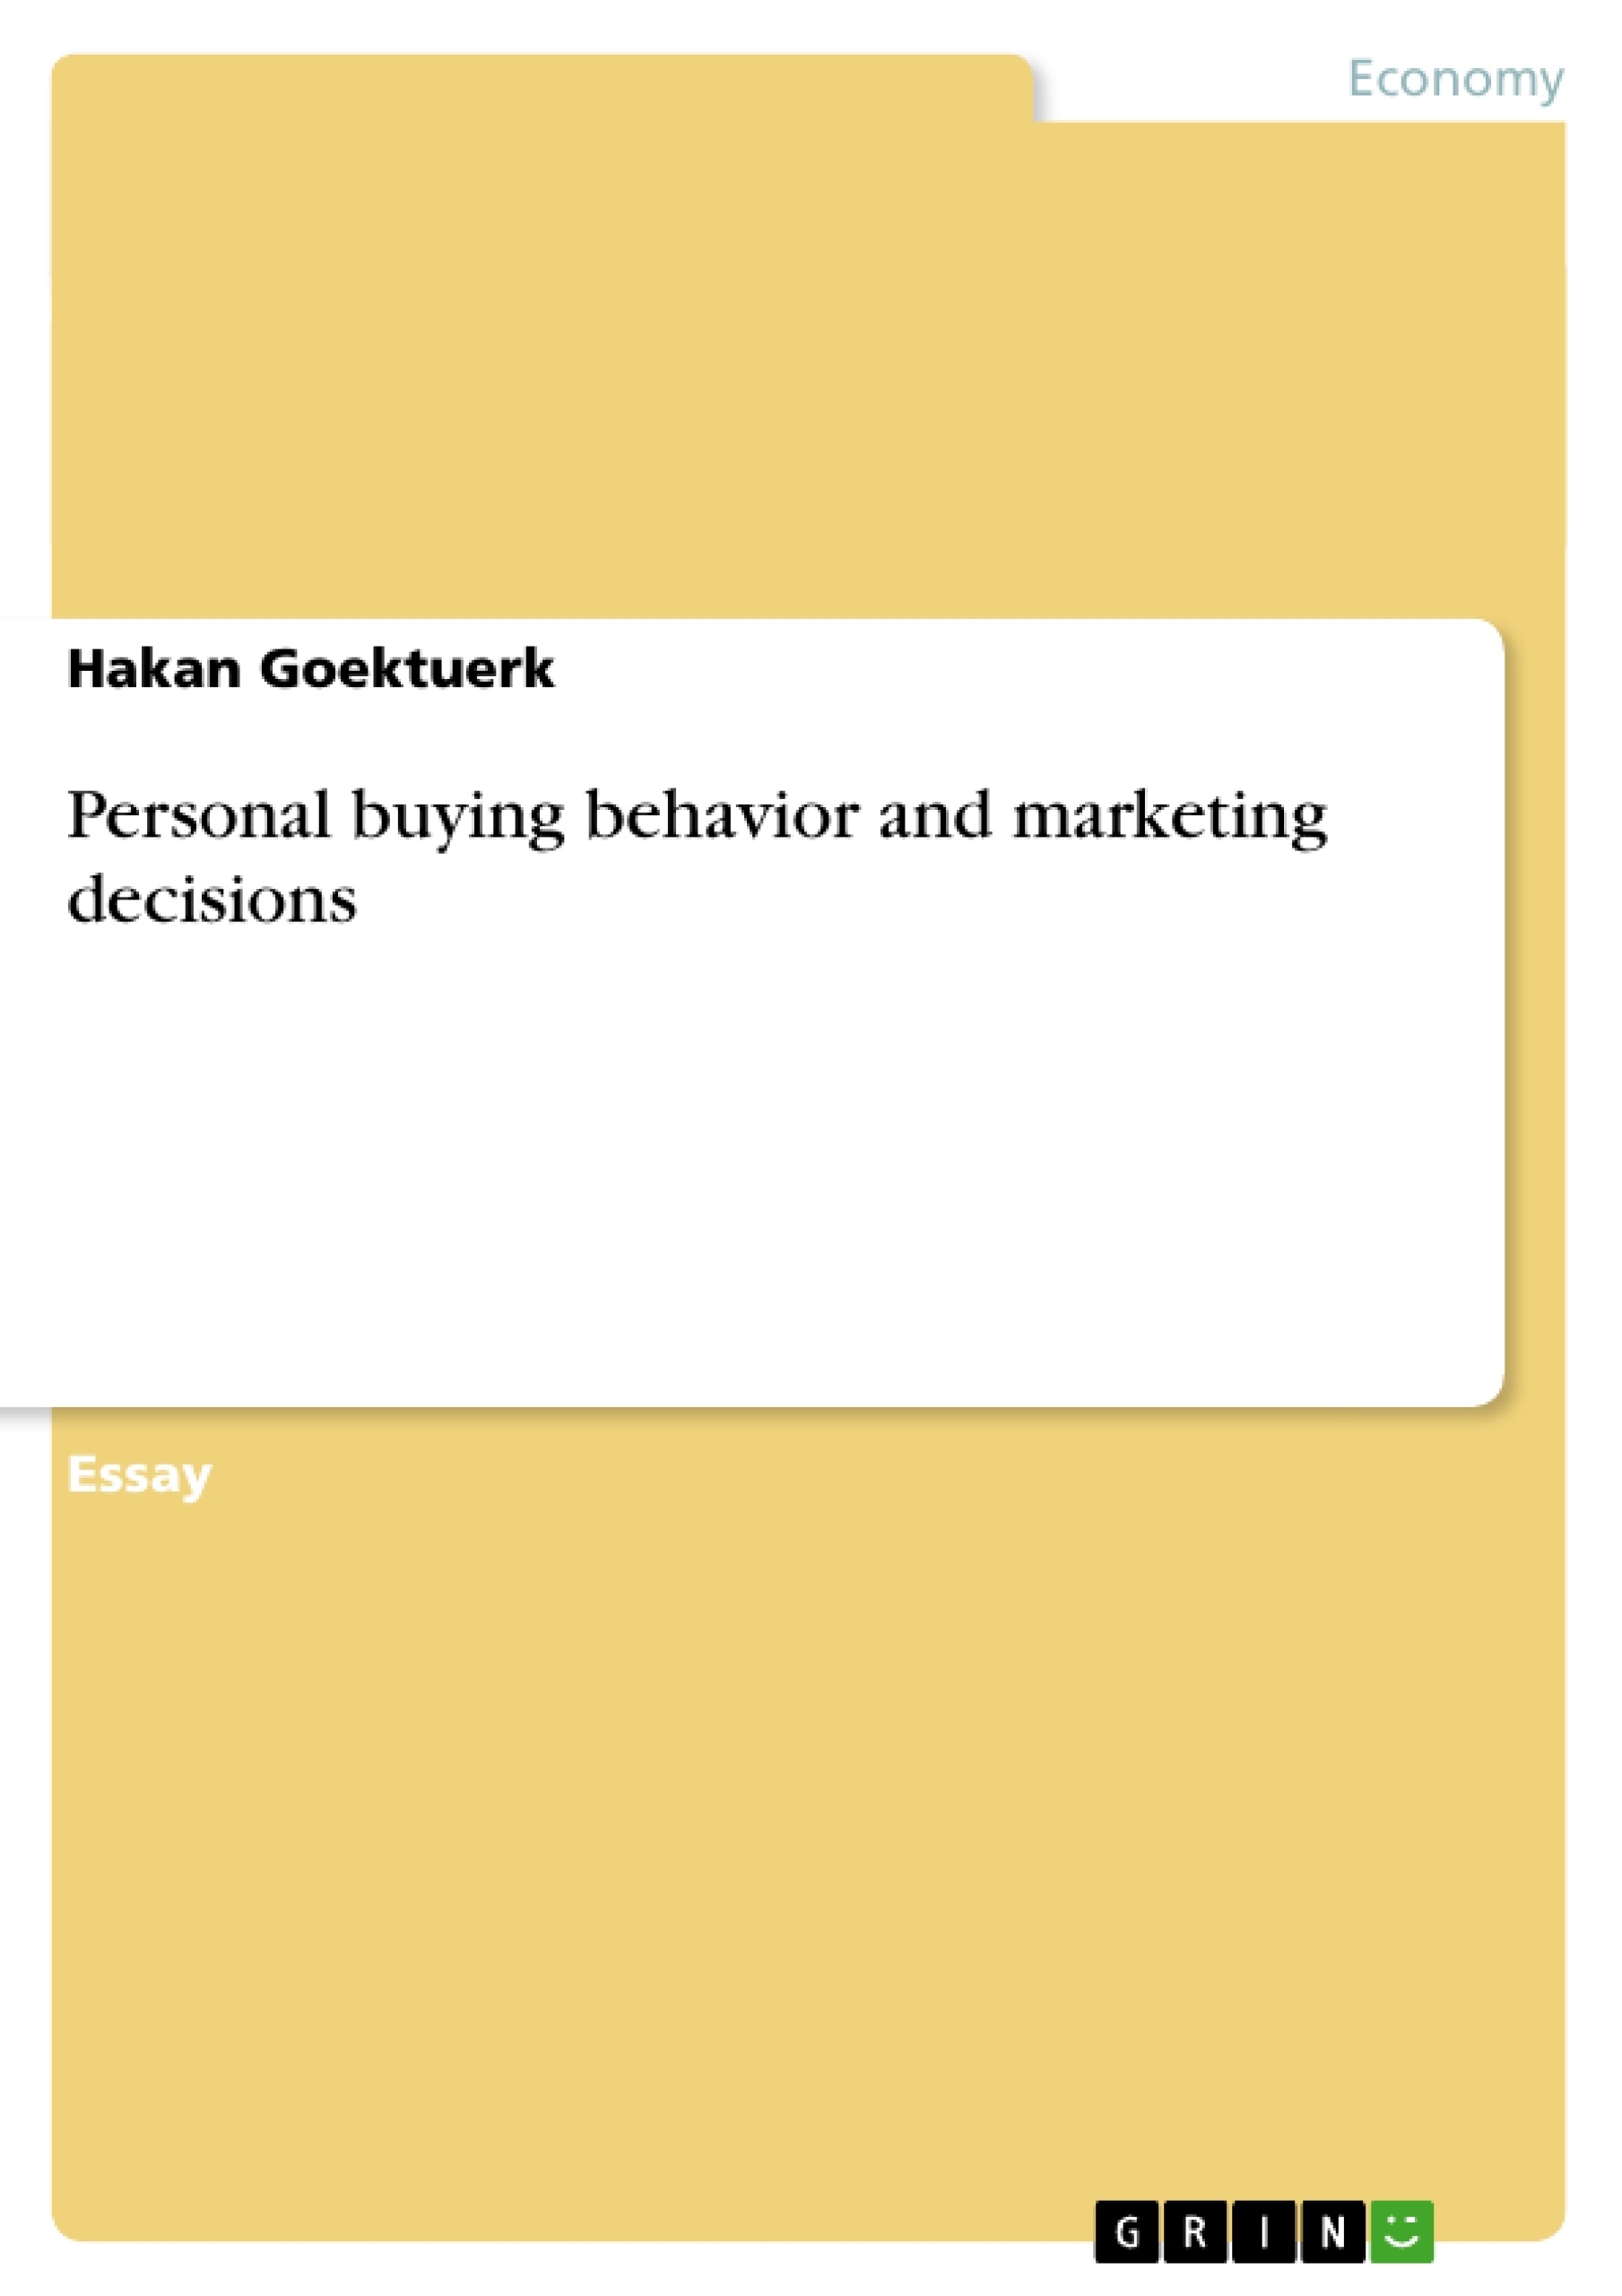 Title: Personal buying behavior and marketing decisions